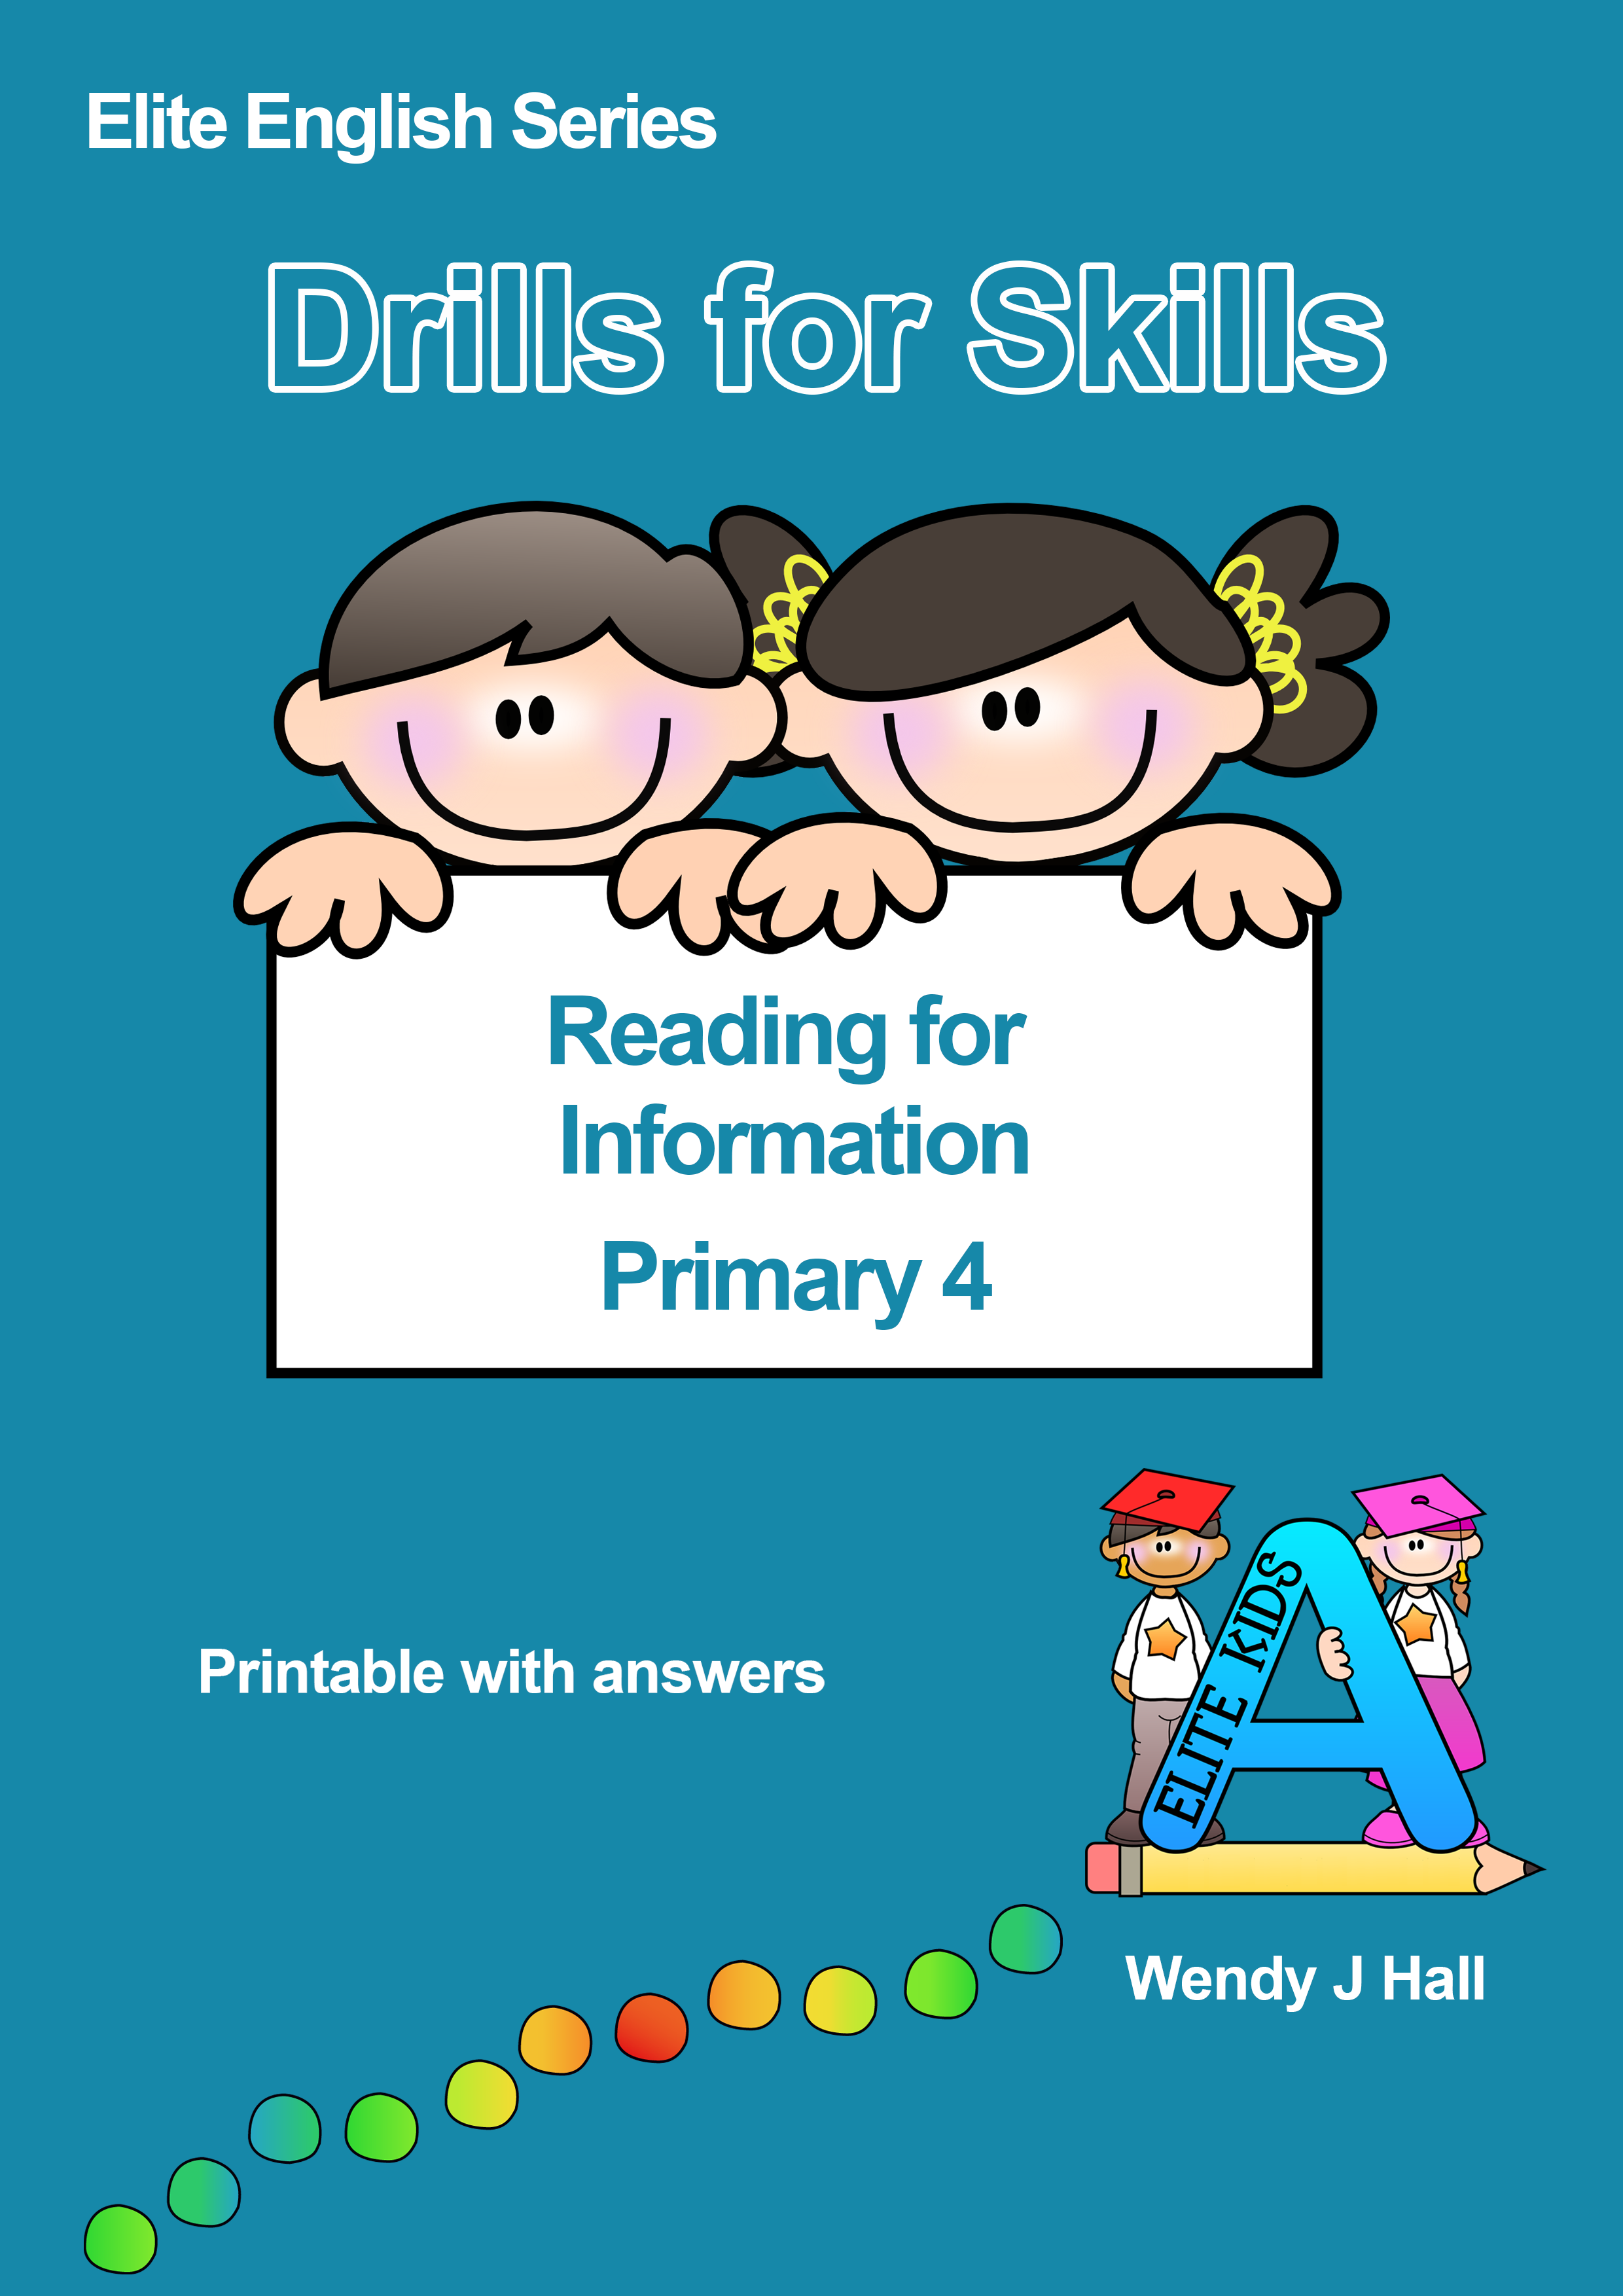 Drills for Skills - Reading for information | Primary 4